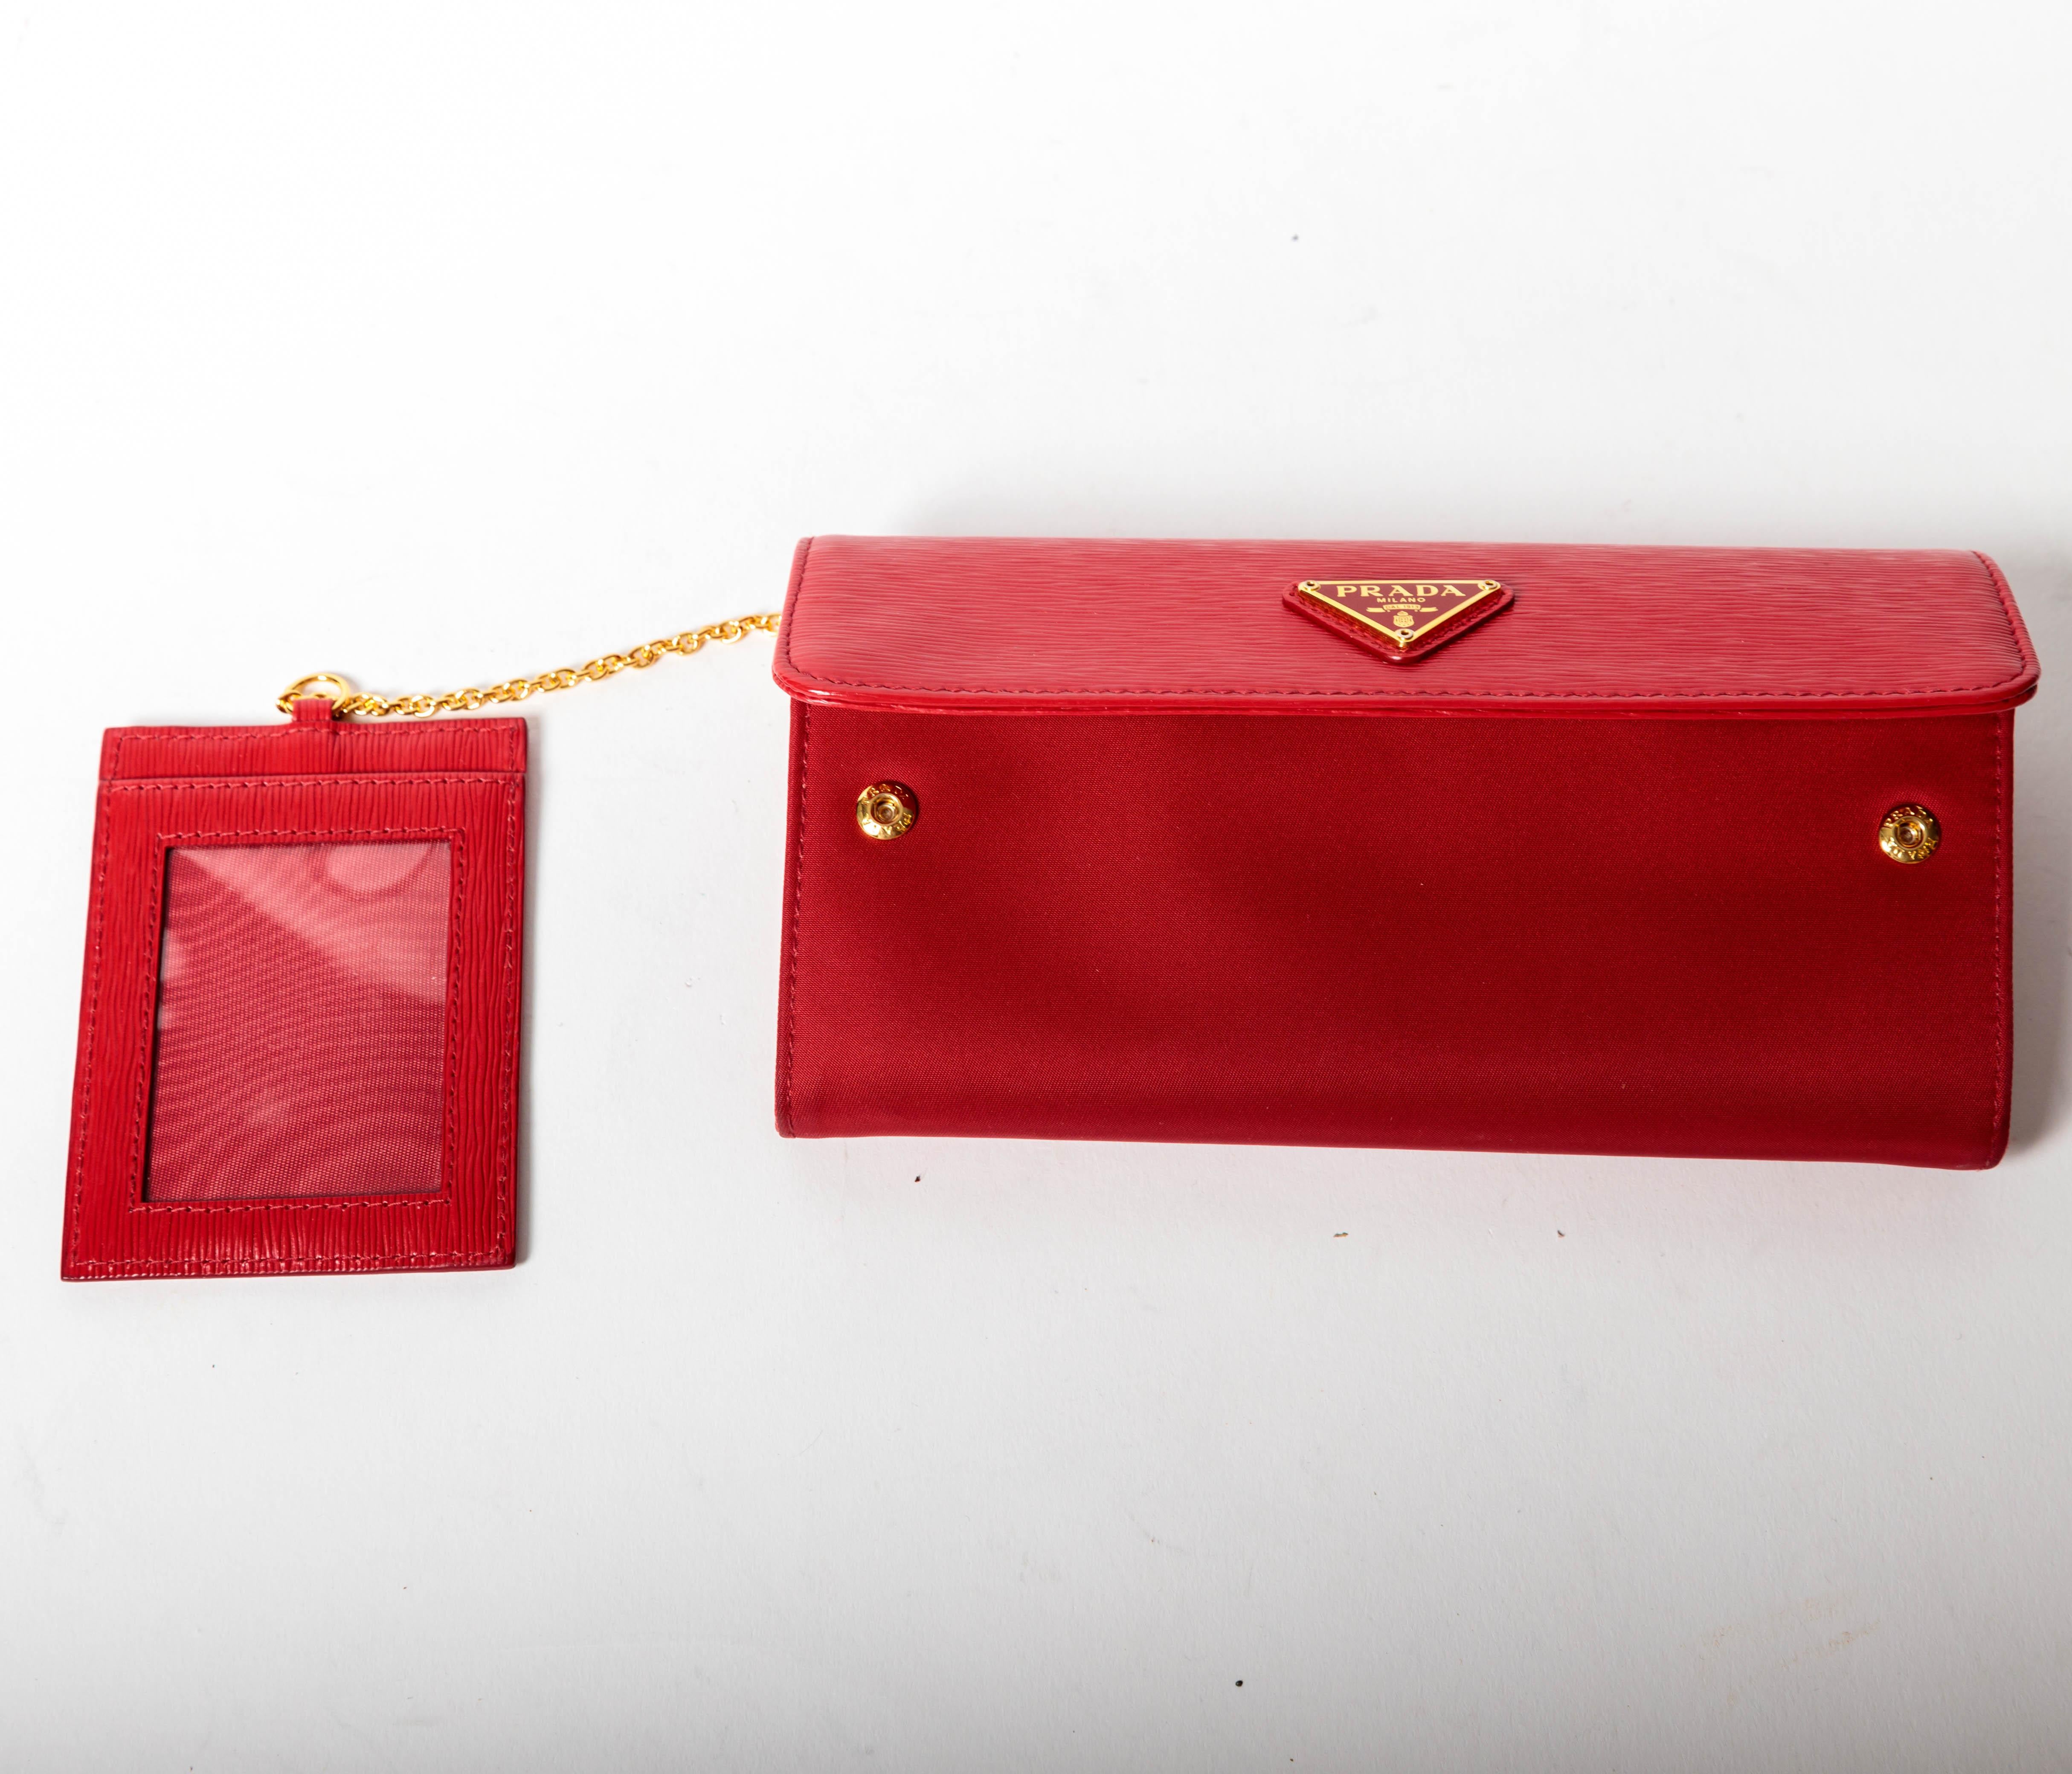 Prada Nylon and Leather Red Snap Long Wallet with Box In Good Condition For Sale In Westhampton Beach, NY